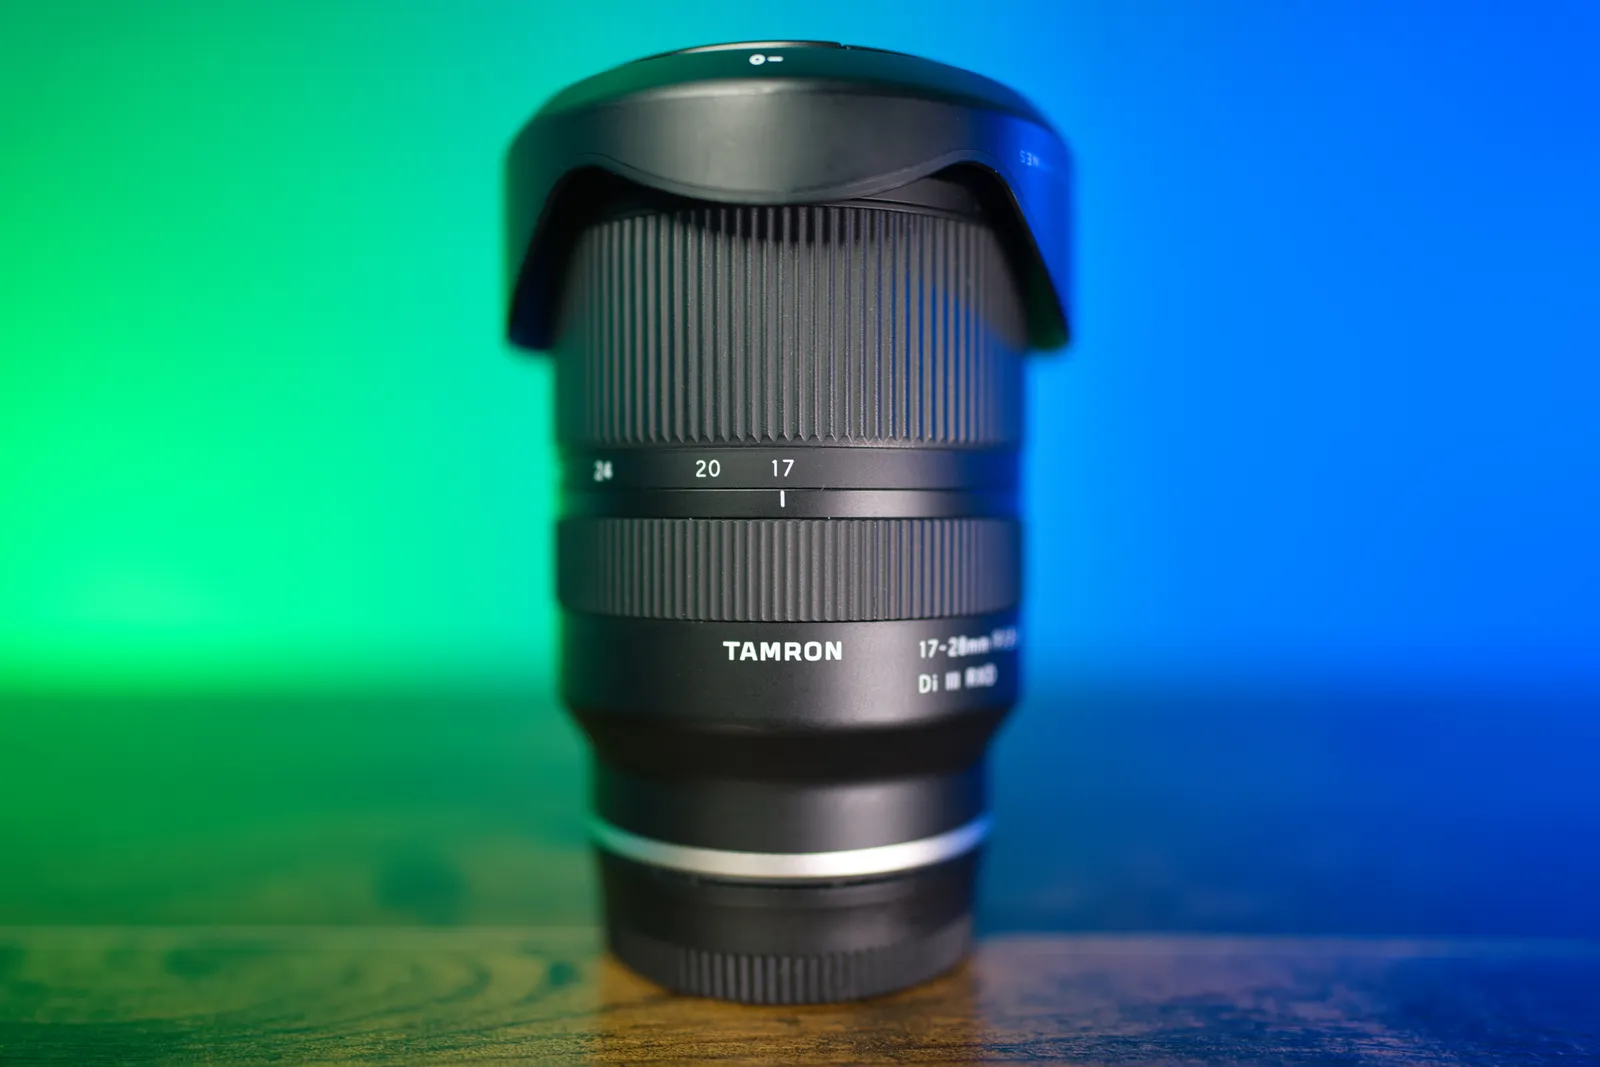 Tamron 17-28mm f/2.8 Di III RXD Lens - Sony FE From Paul Feinberg